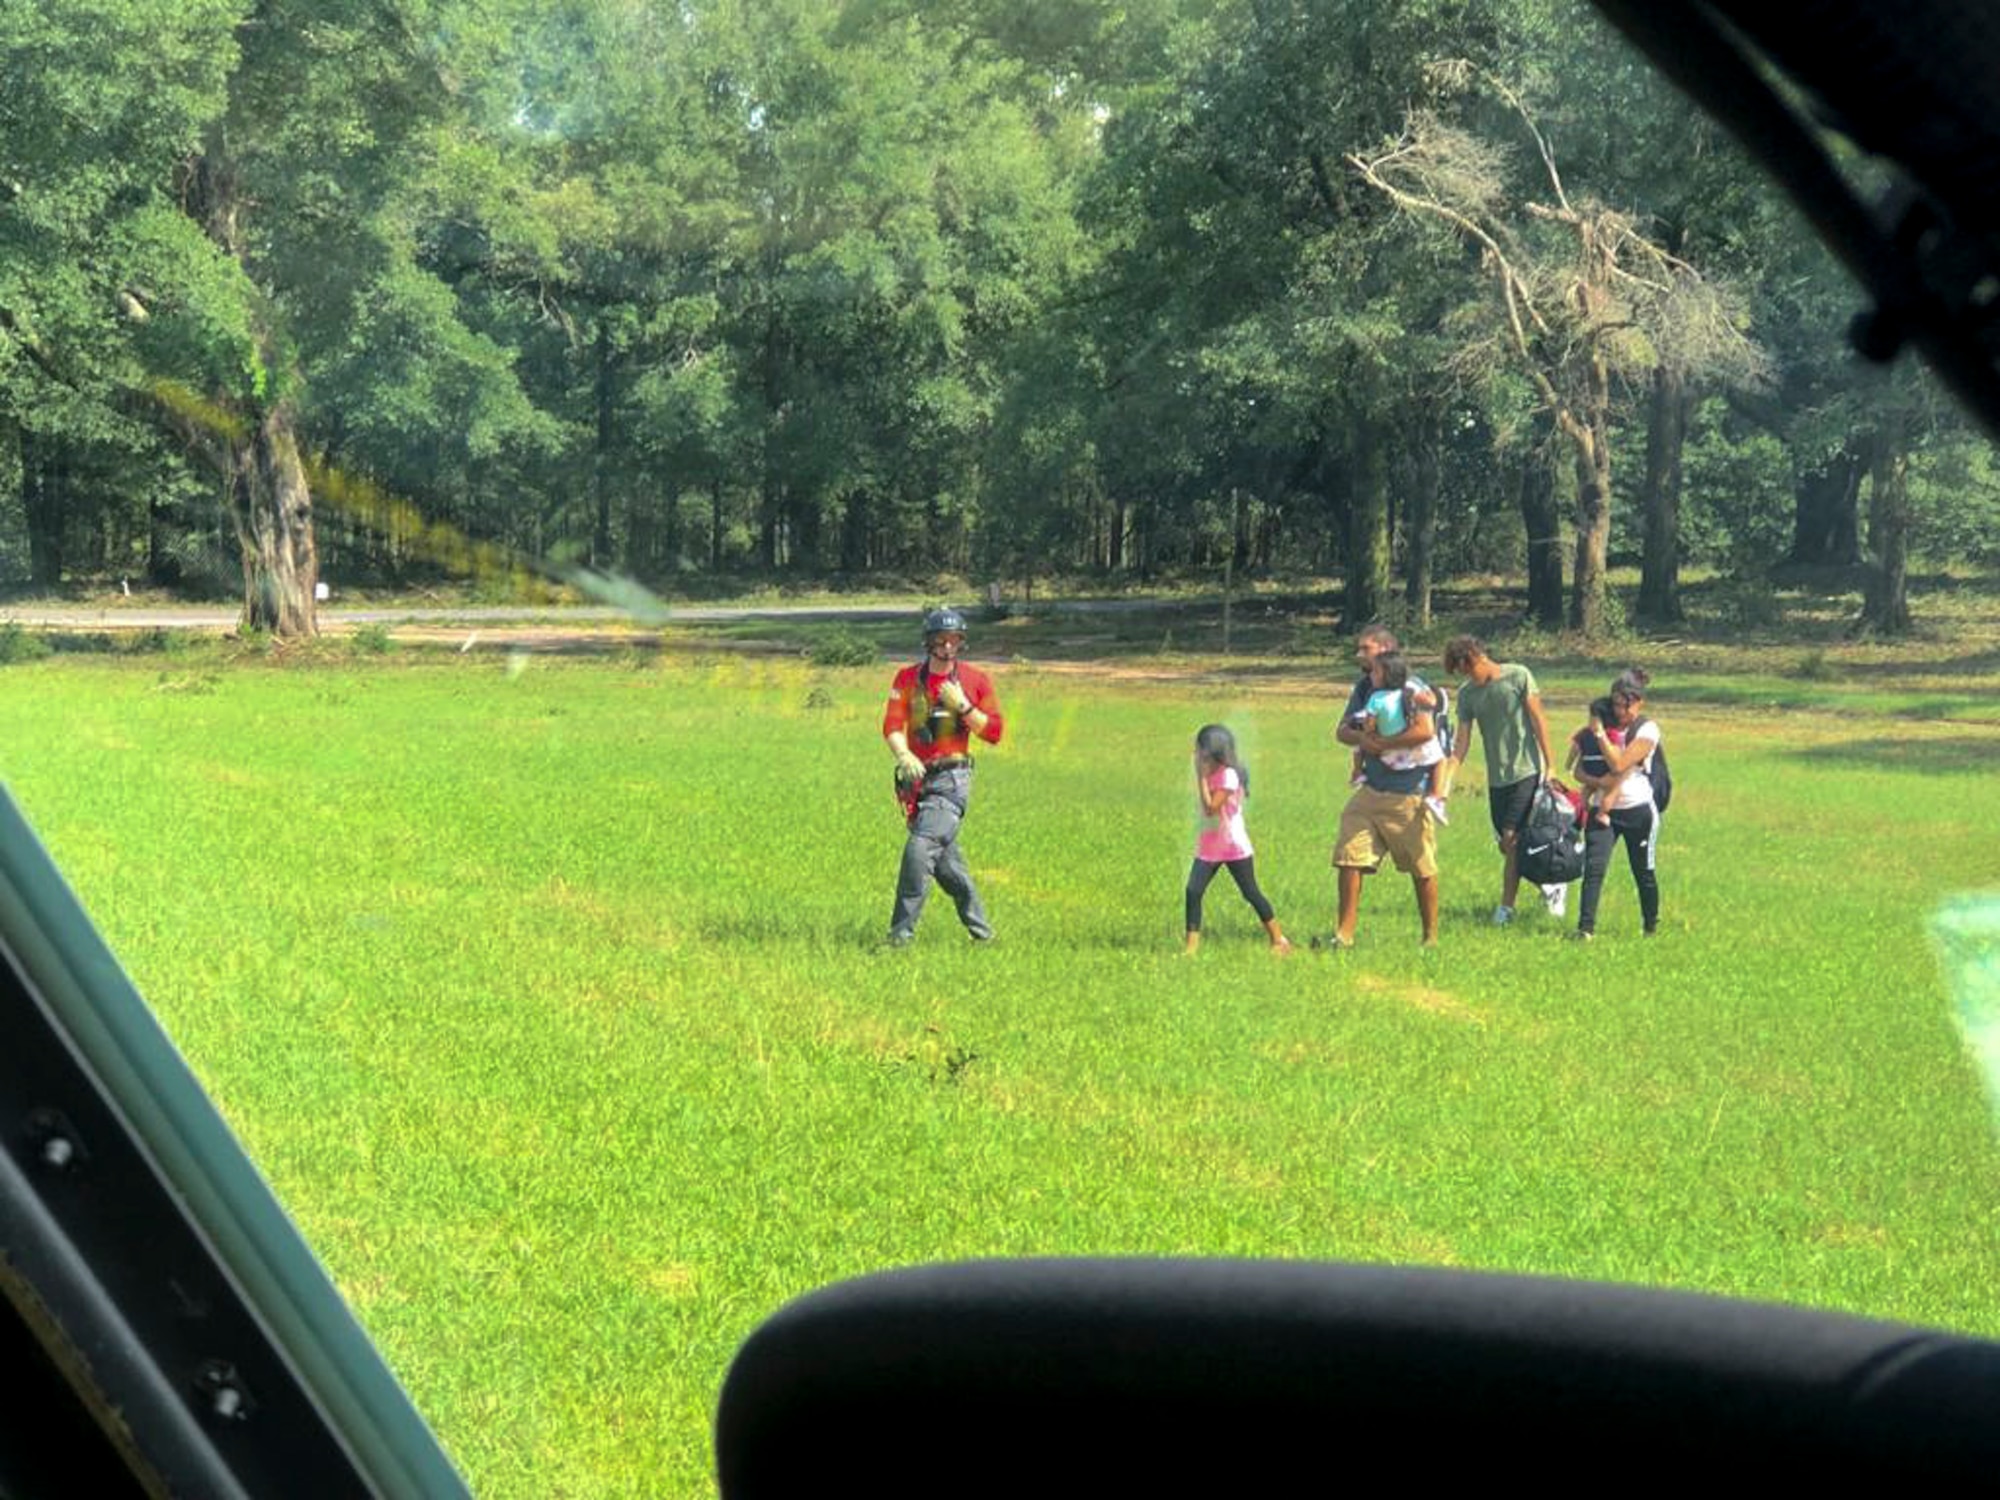 Guardsmen rescue 19 during relief efforts in Hurricane Florence